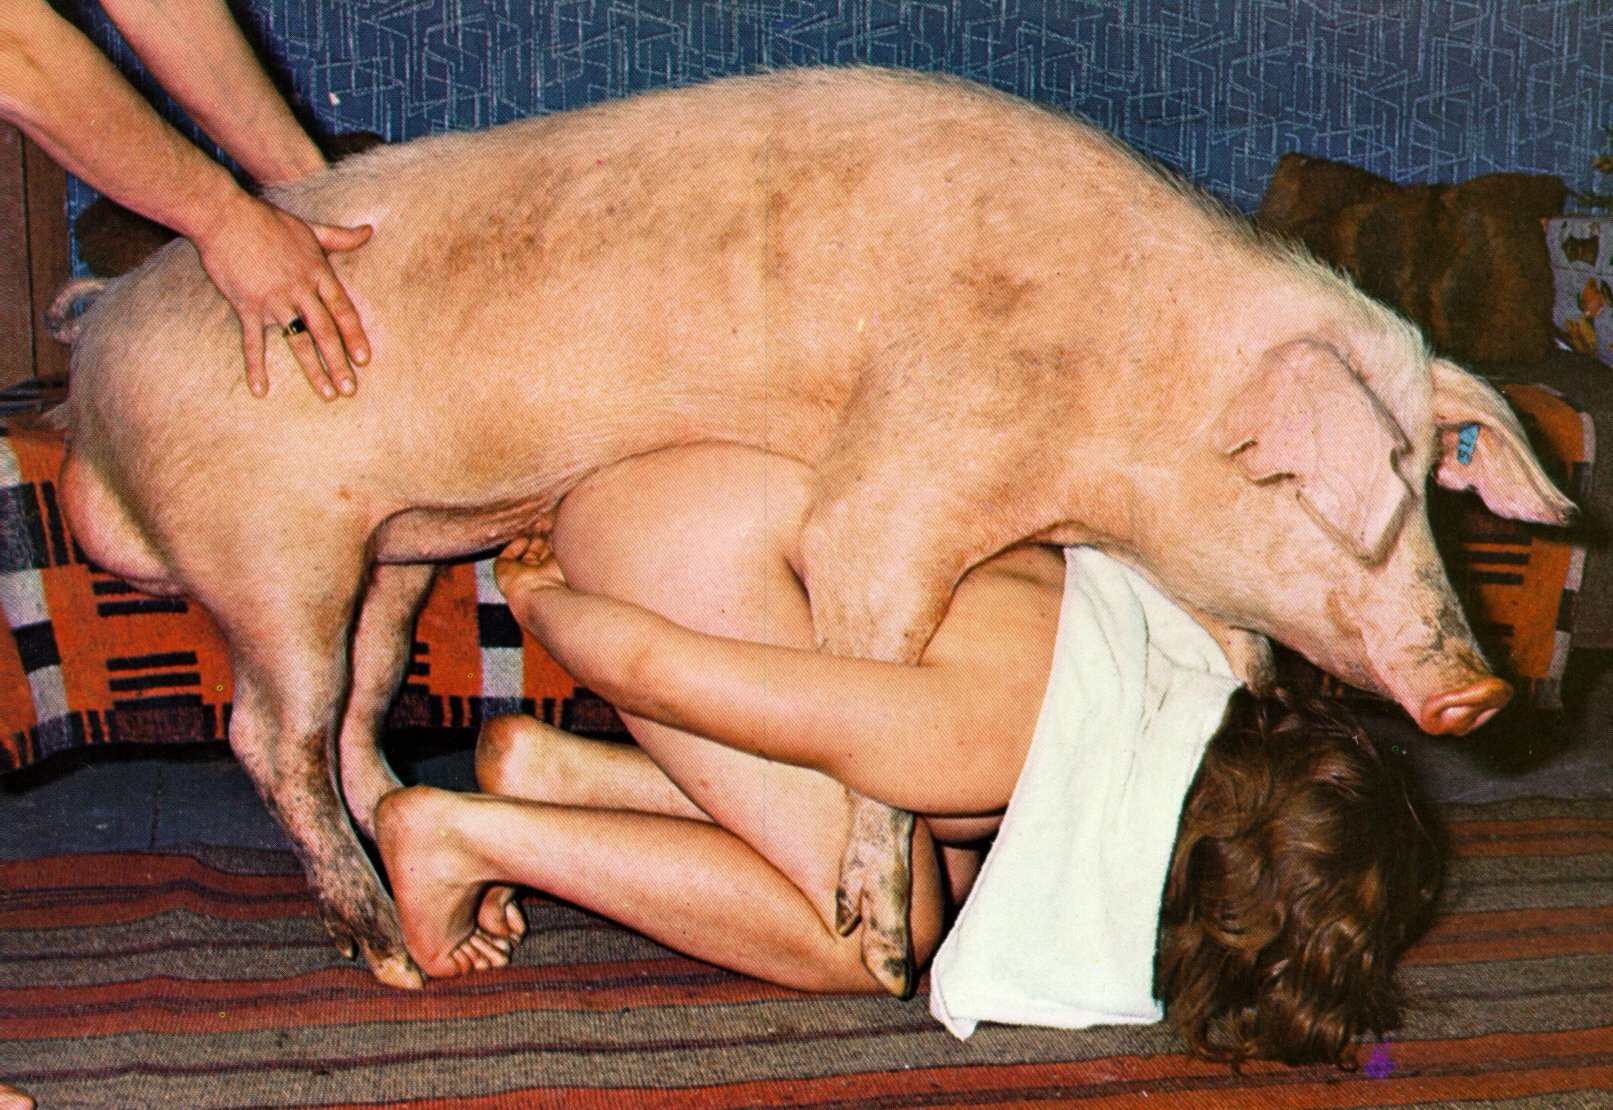 Pig and women sex video